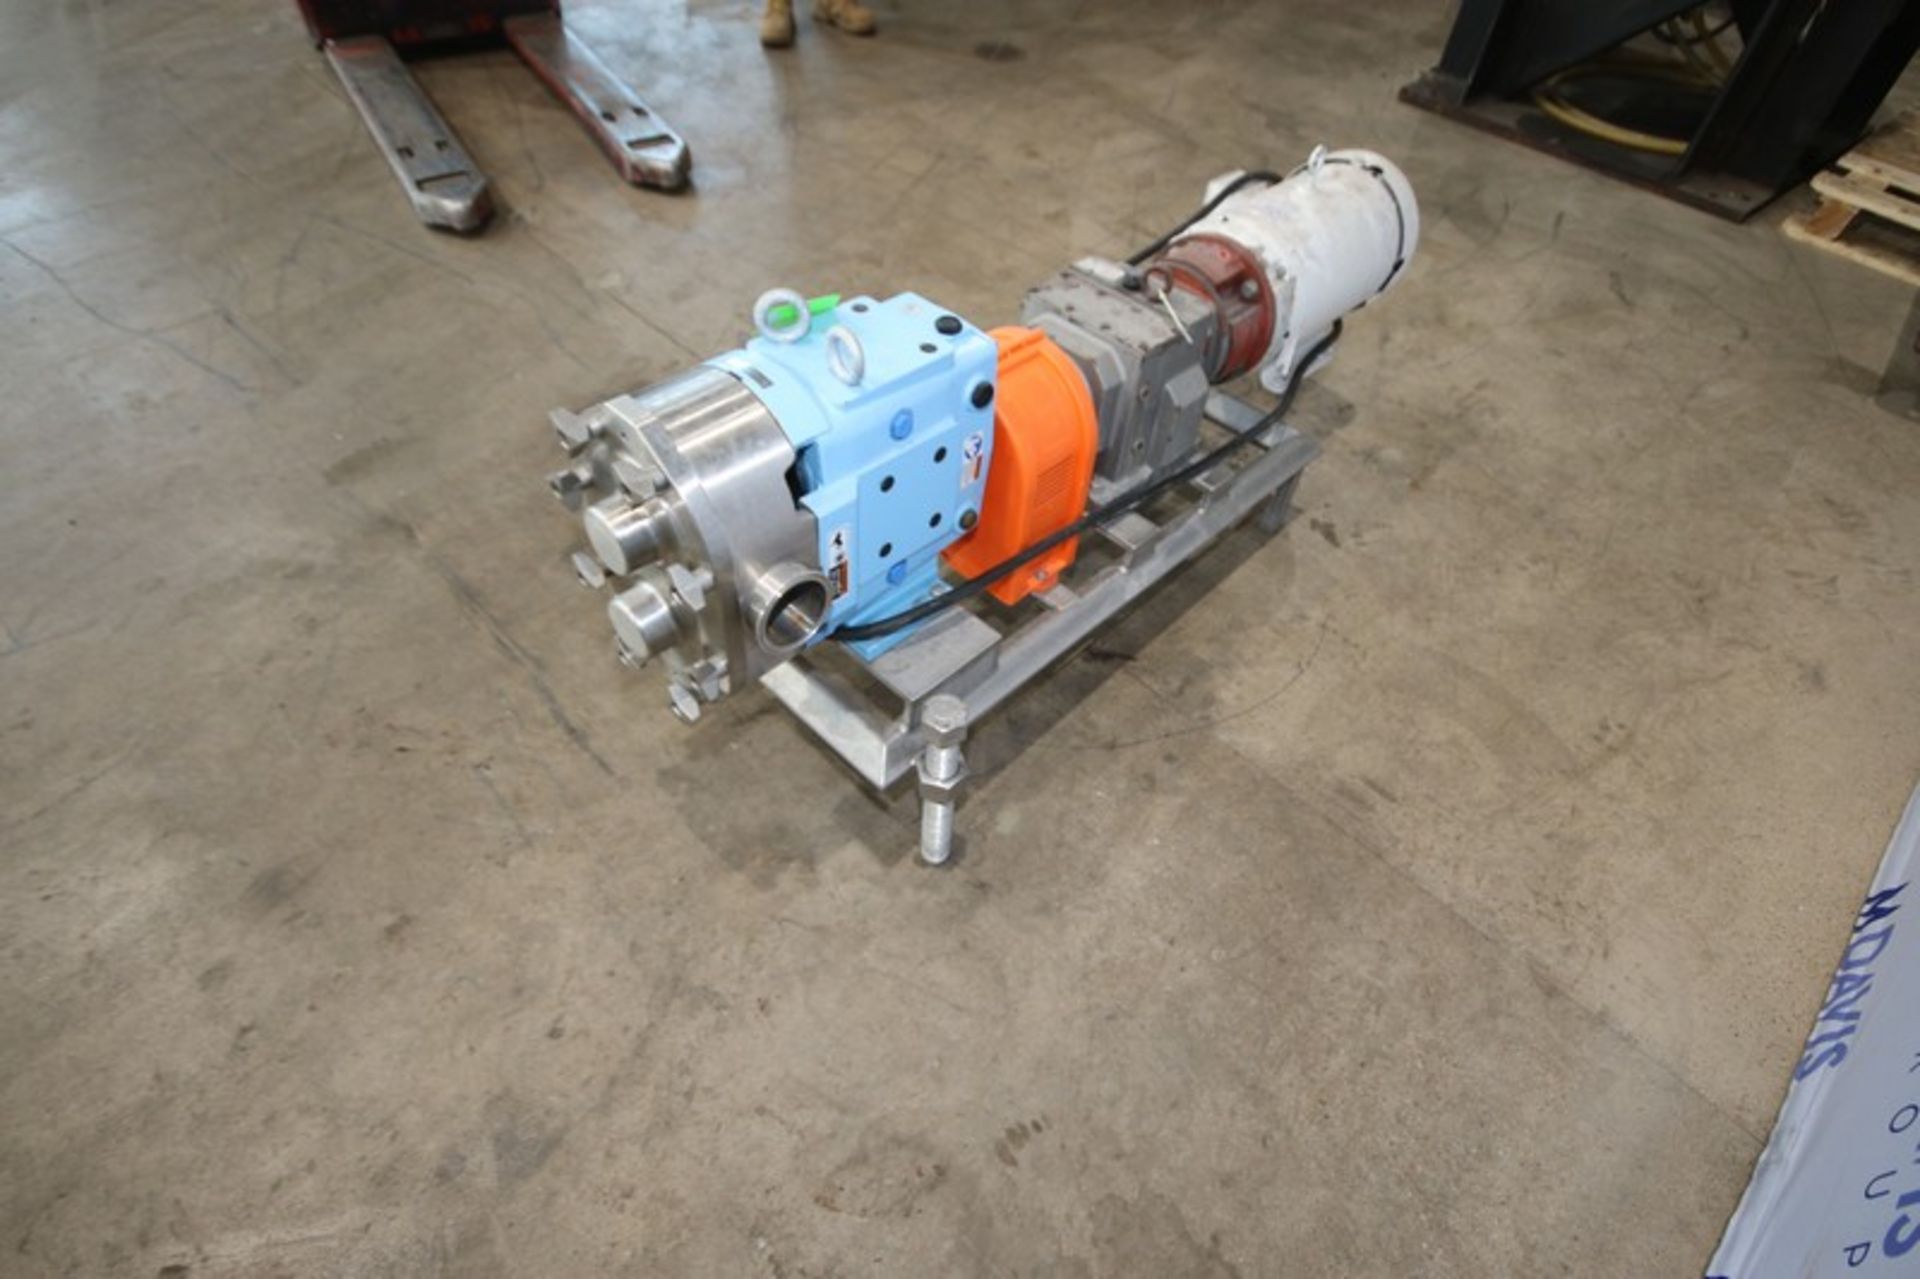 2020 SPX 10 hp Positive Displacement Pump, M/N 130 U1R2, S/N 1000003908697, with Aprox. 3" Clamp - Image 4 of 7